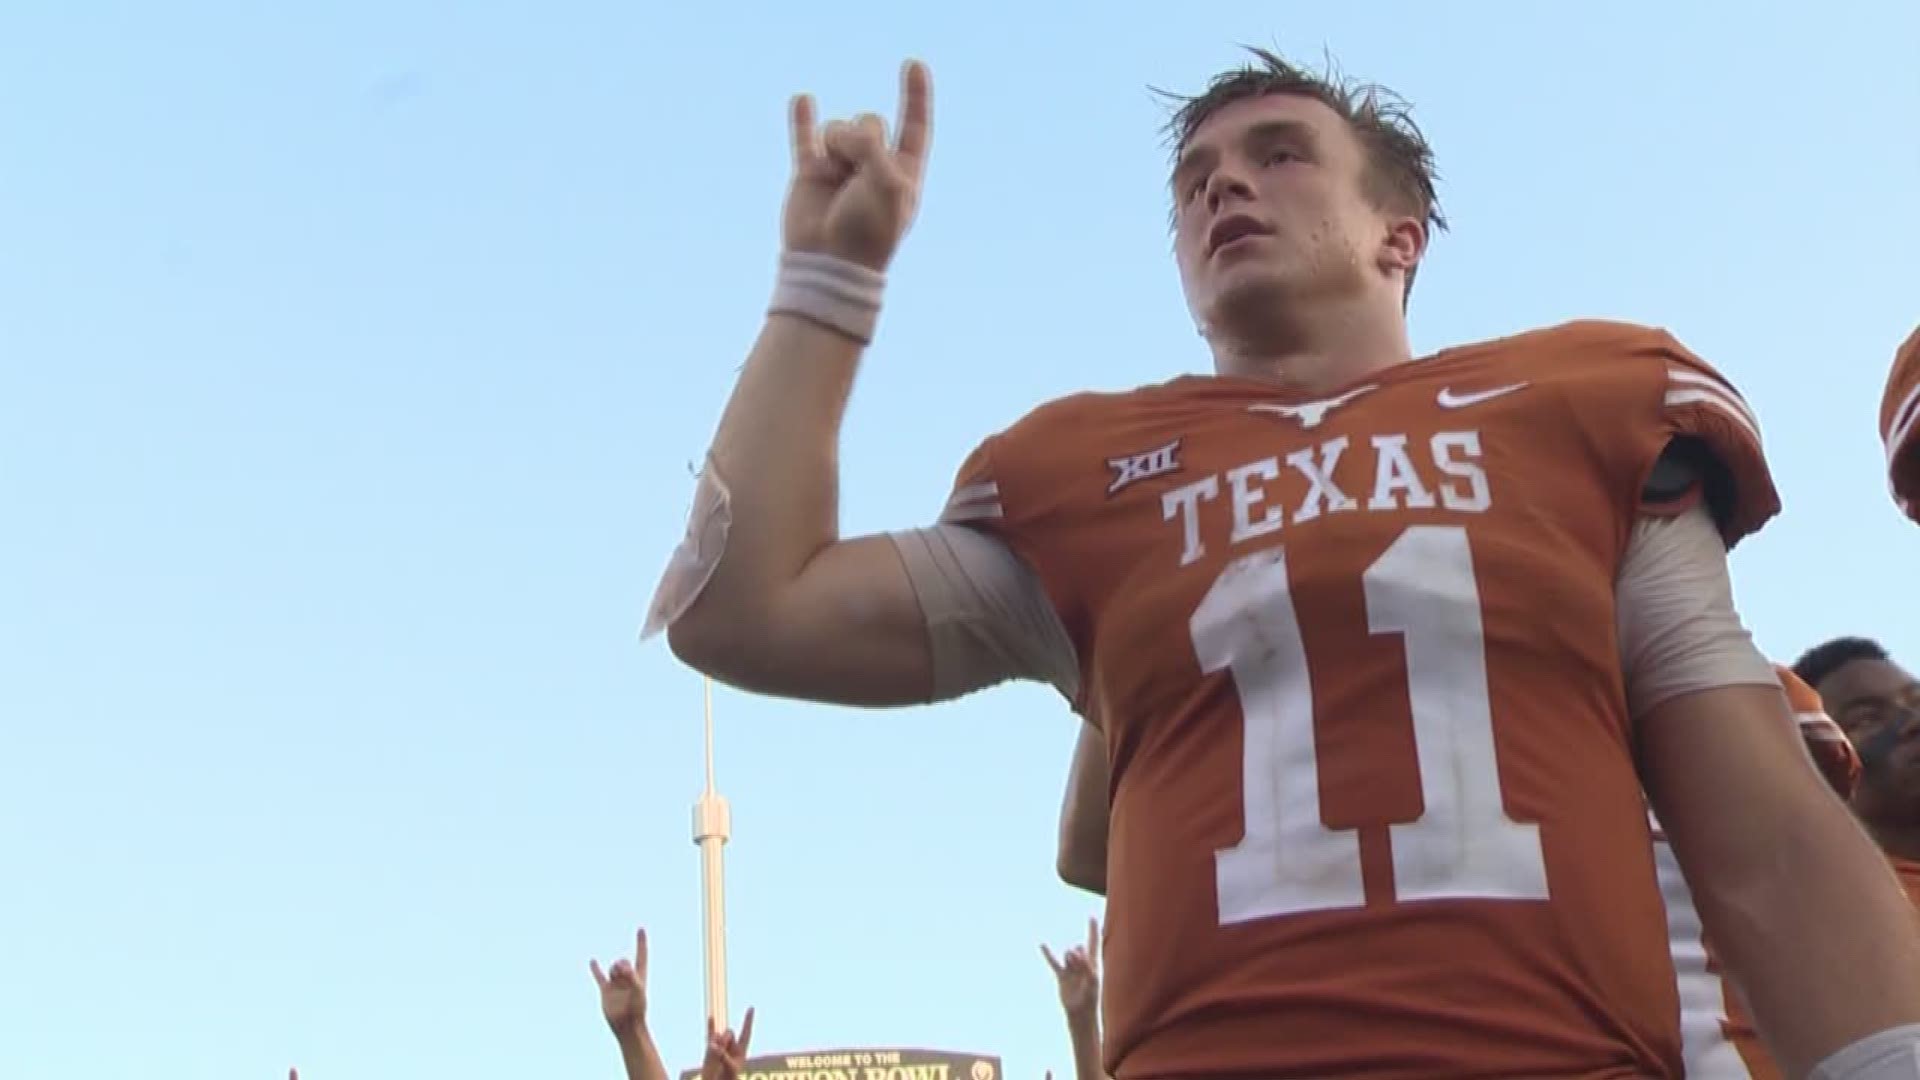 The Oklahoma Sooners beat Texas in the Red River Rivalry.